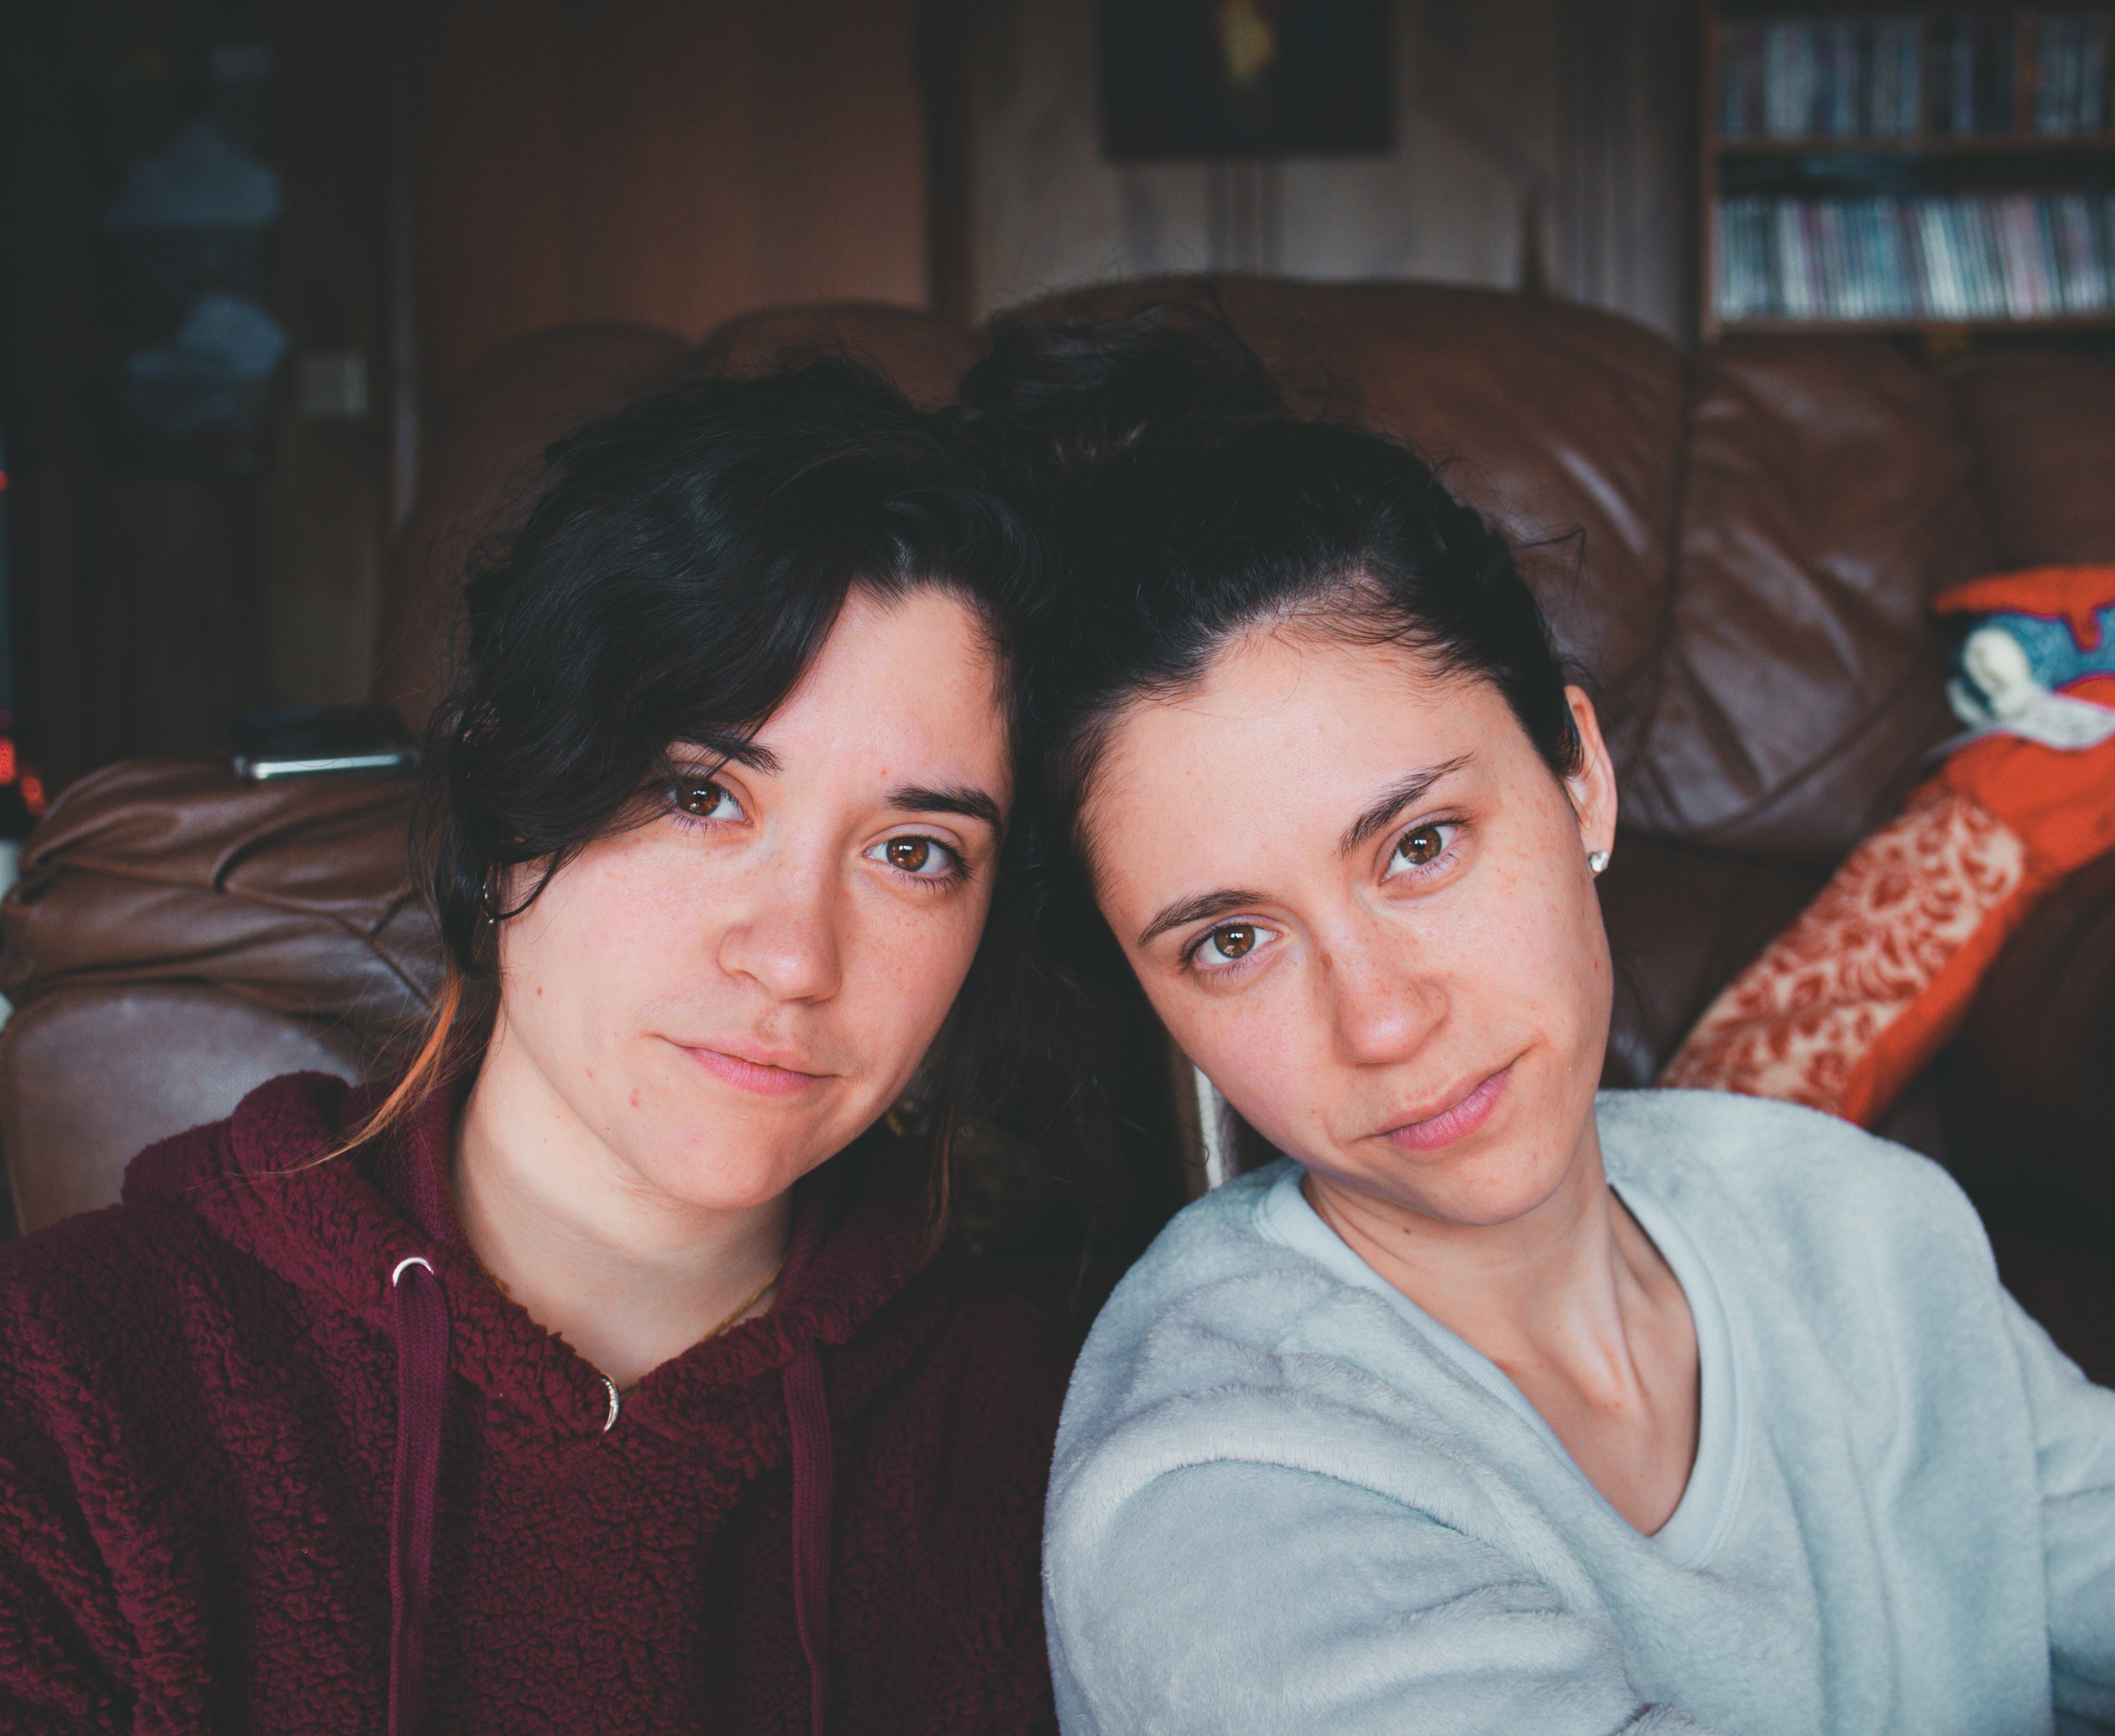 Twin sisters take a picture of themselves in the living room | Photo: Pexels